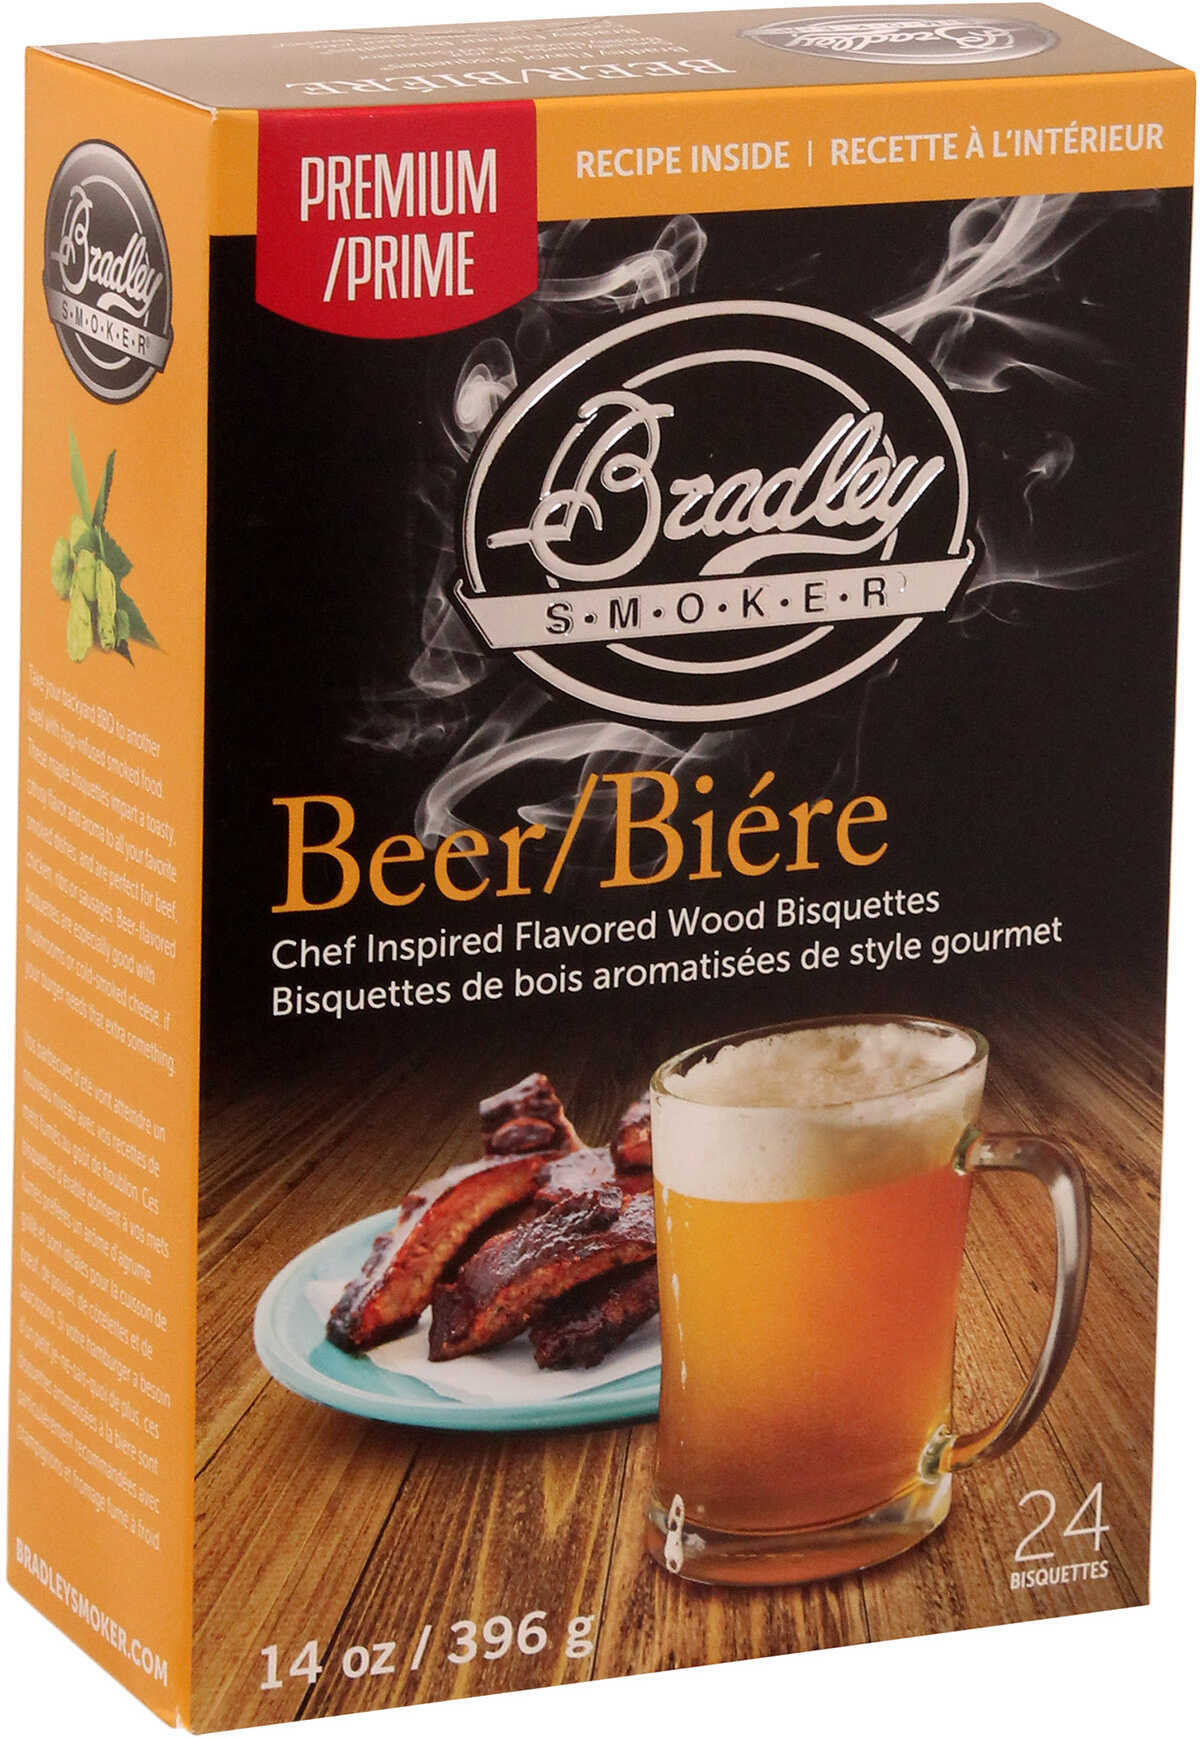 Bradley Smoker Beer BISQUETTES 24 Pack